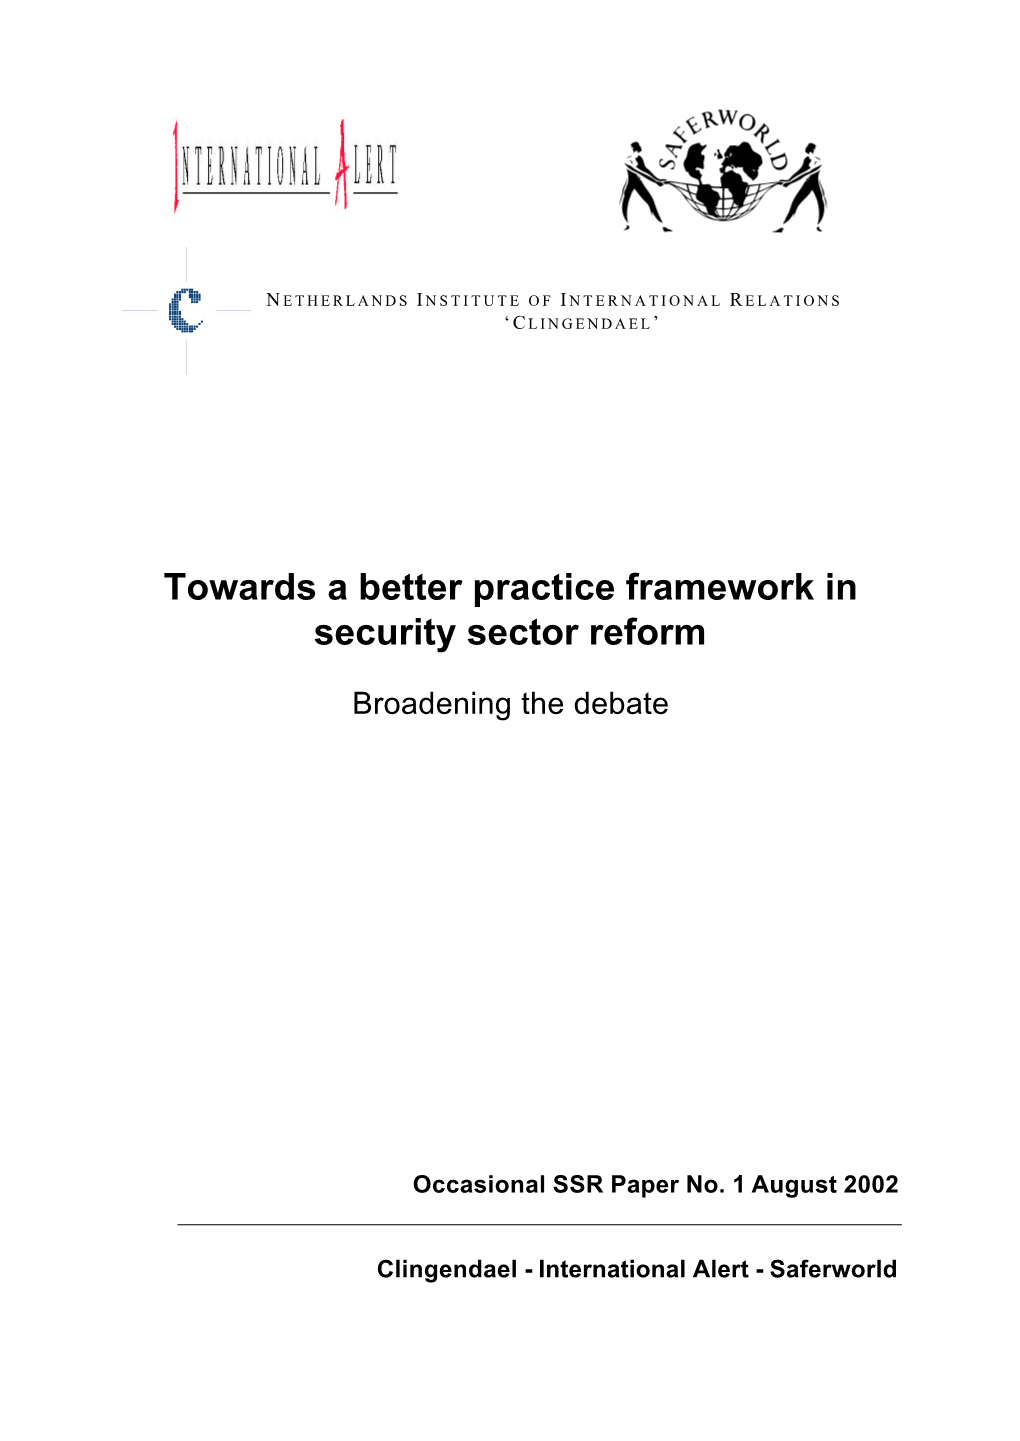 Towards a Better Practice Framework in Security Sector Reform